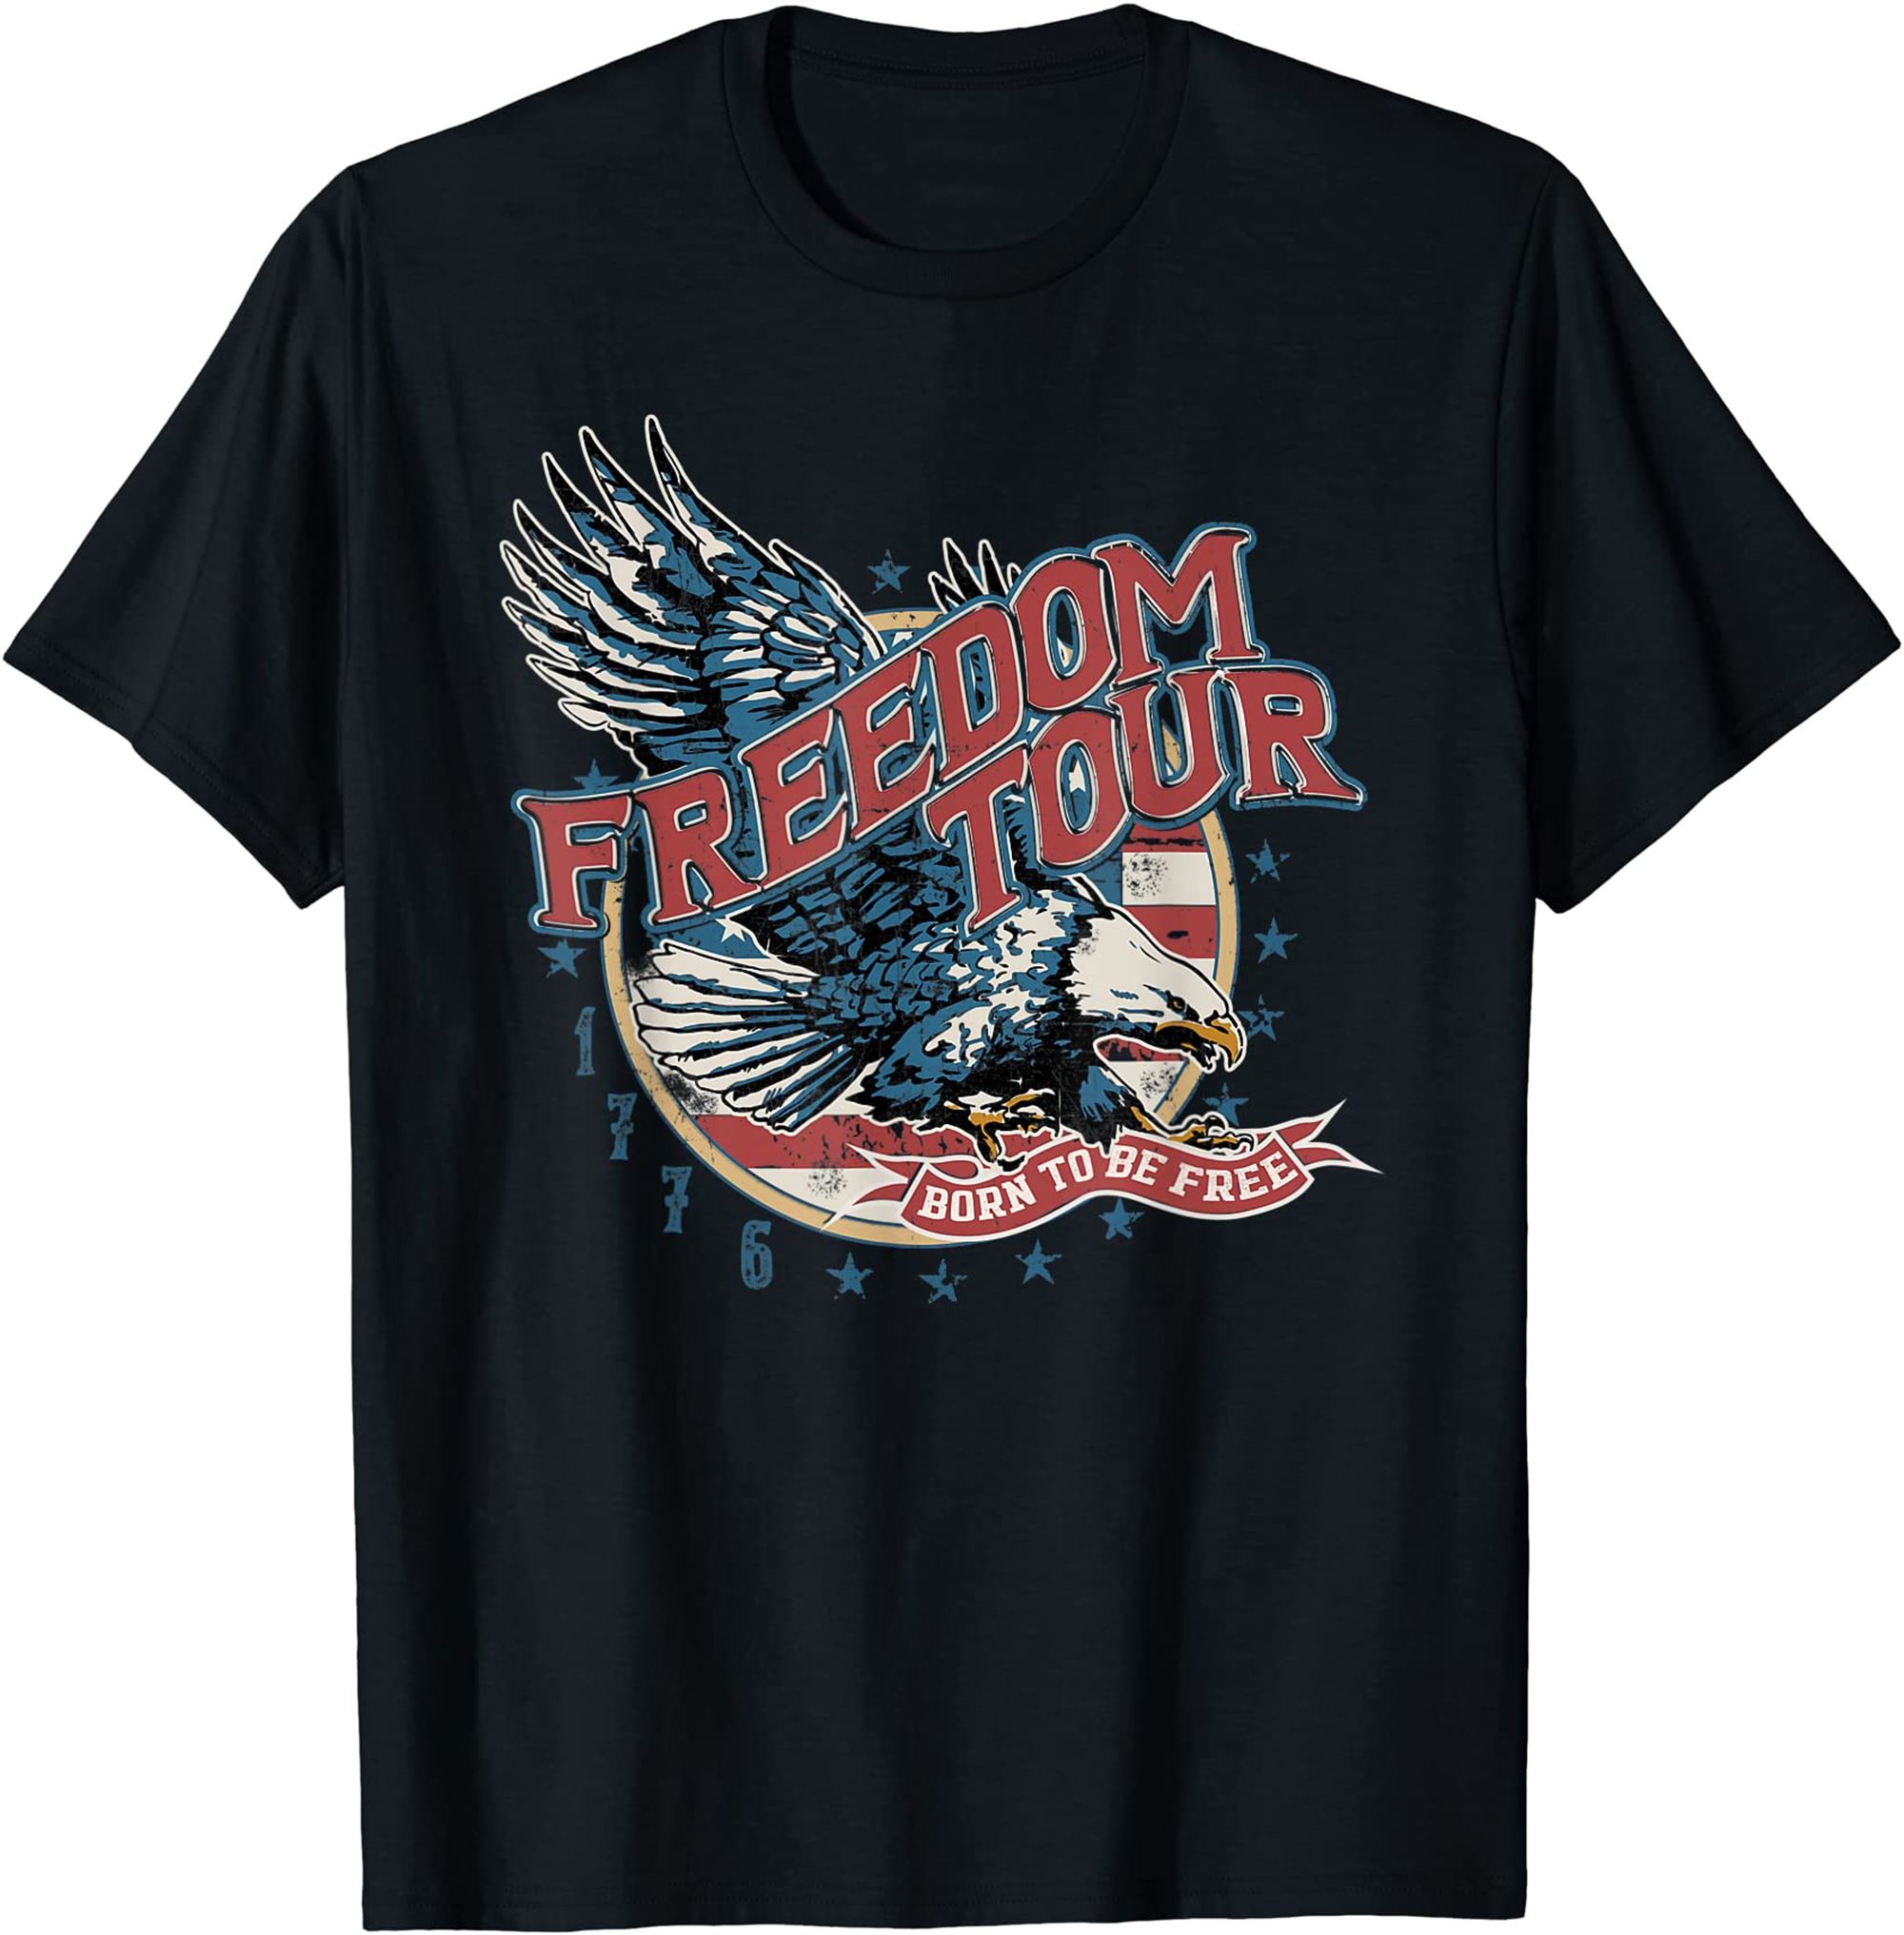 Vintage Style Eagle Freedom Tour 4th Of July Patriotism T-shirt Plus Size Up To 5xl